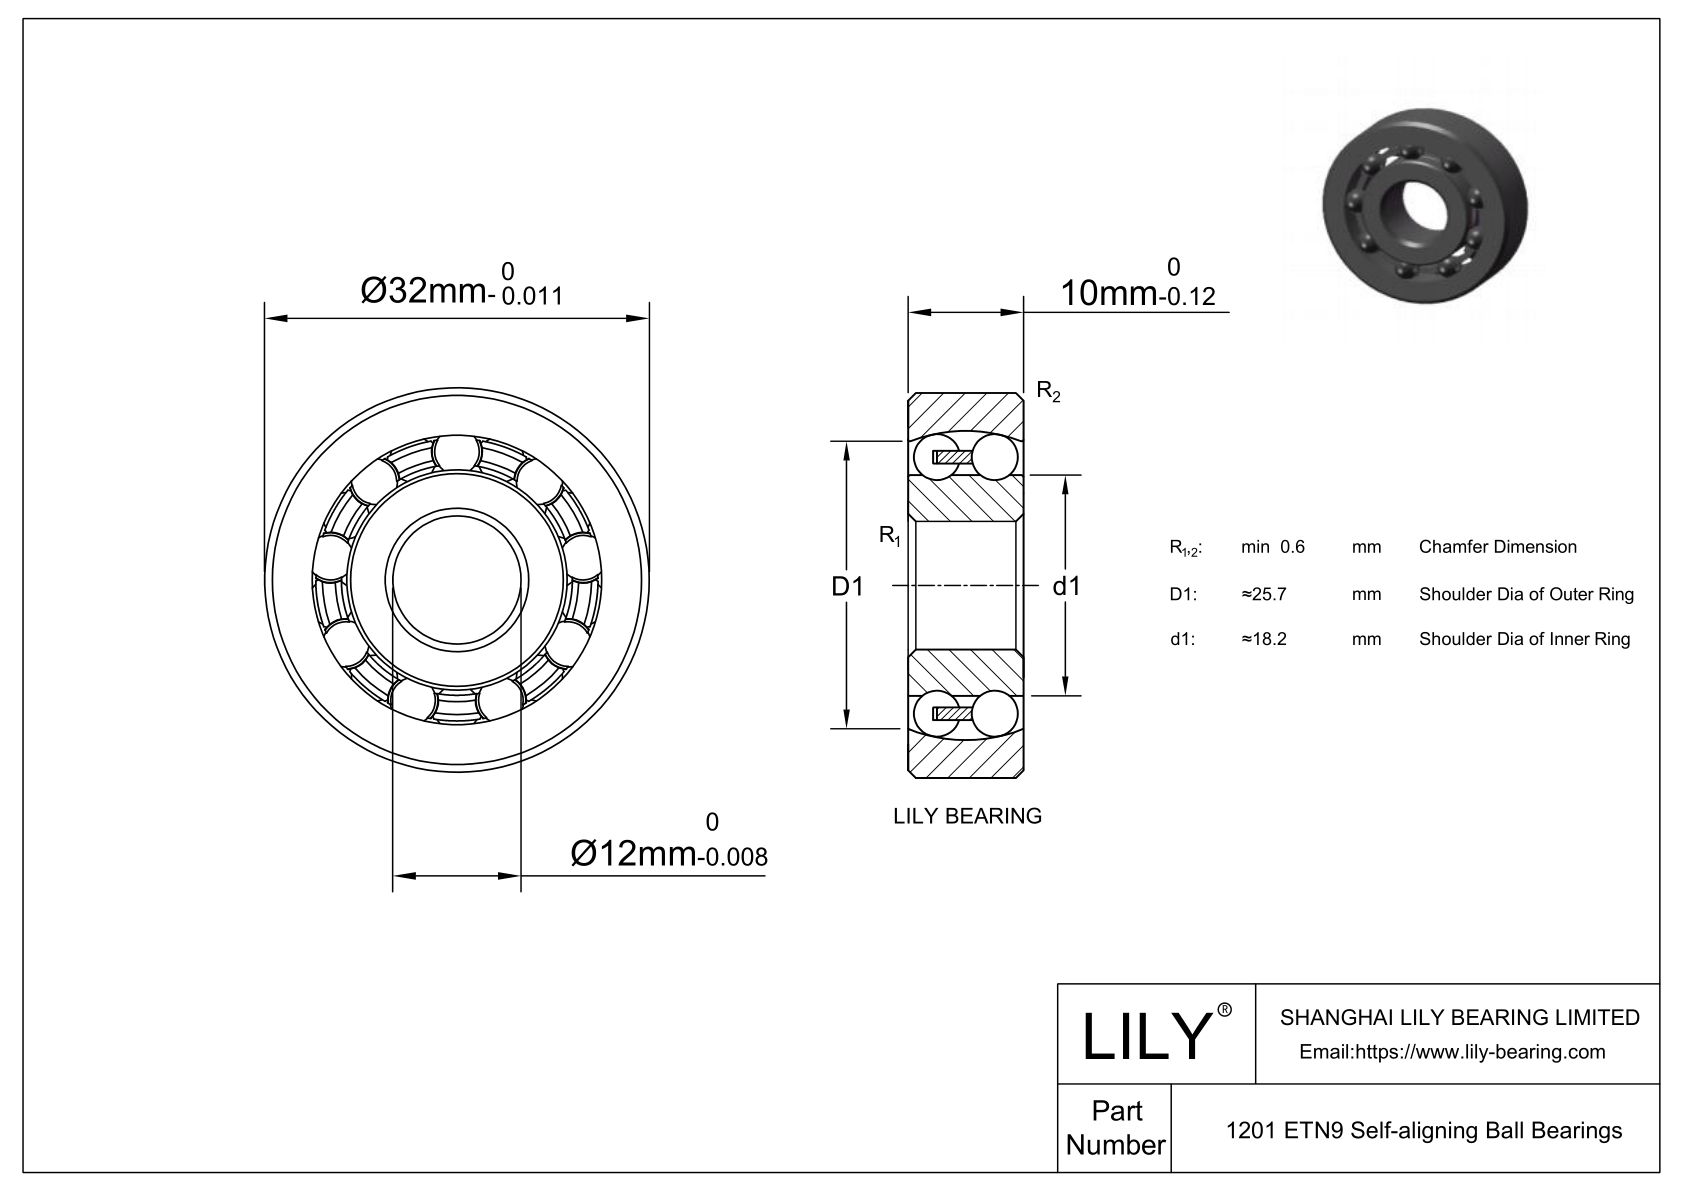 S1201 ETN9 Stainless Steel Self Aligning Ball Bearings cad drawing